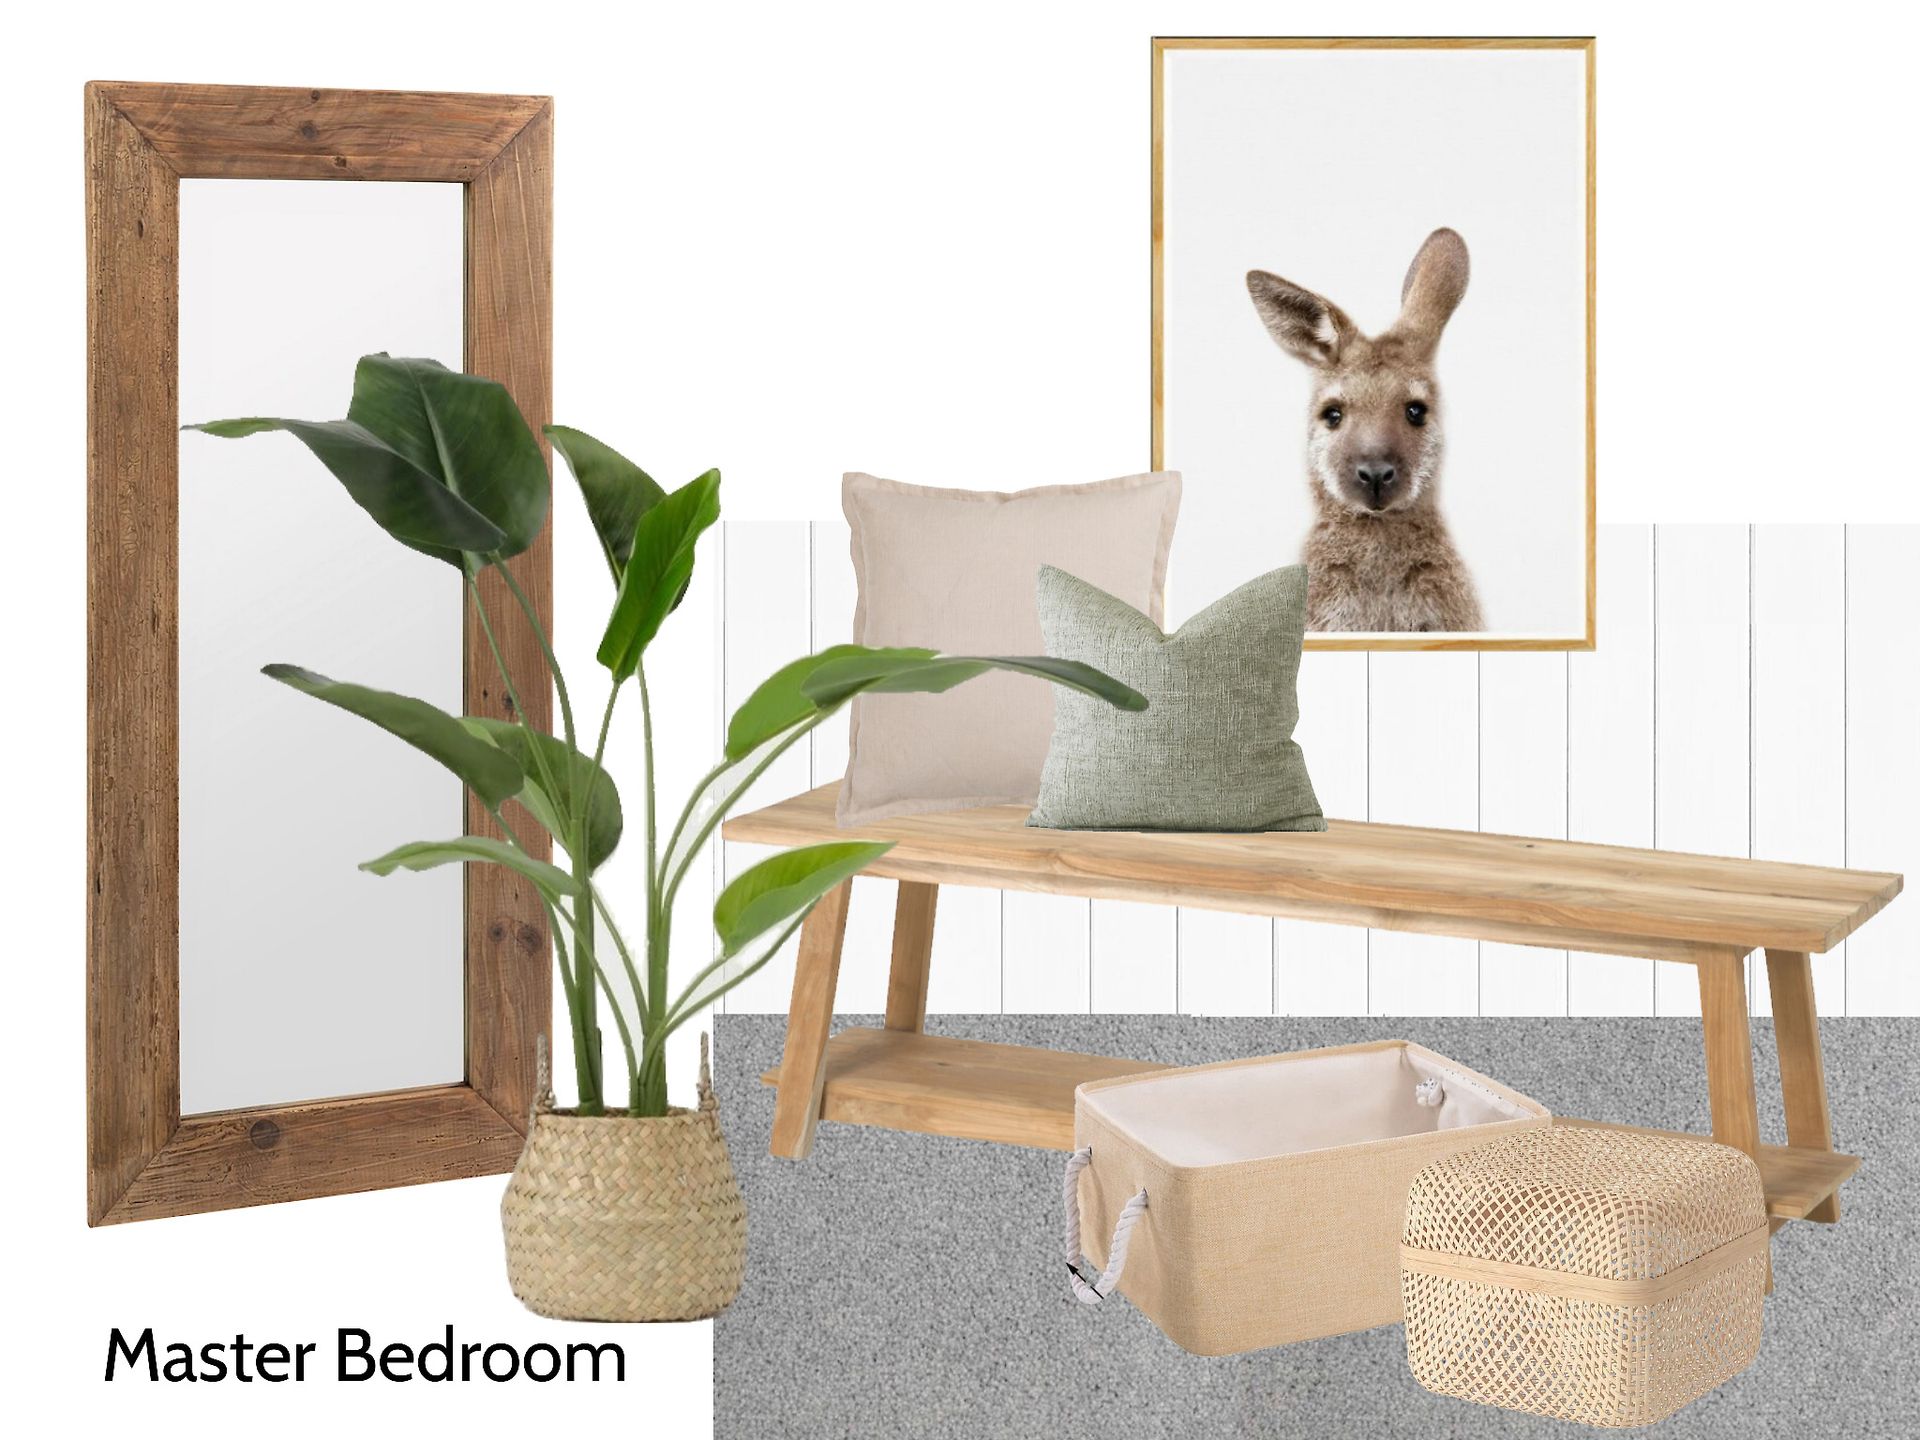 A picture of a master bedroom with a kangaroo on the wall.